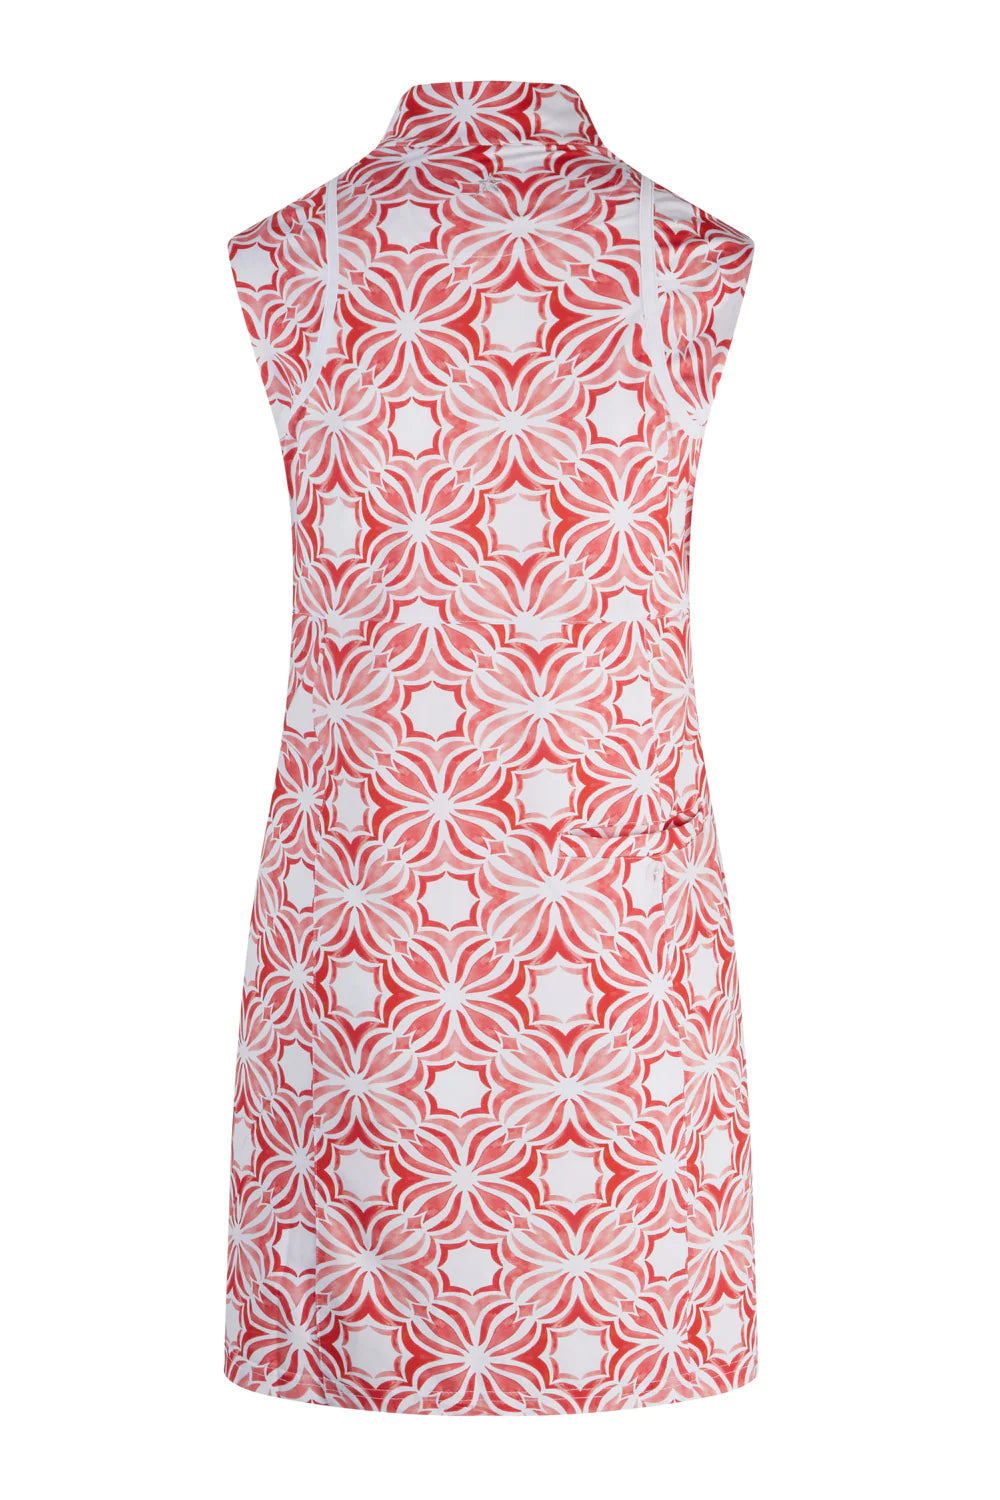 Swing Out Sister Geo Sleeveless Dress - Code Red